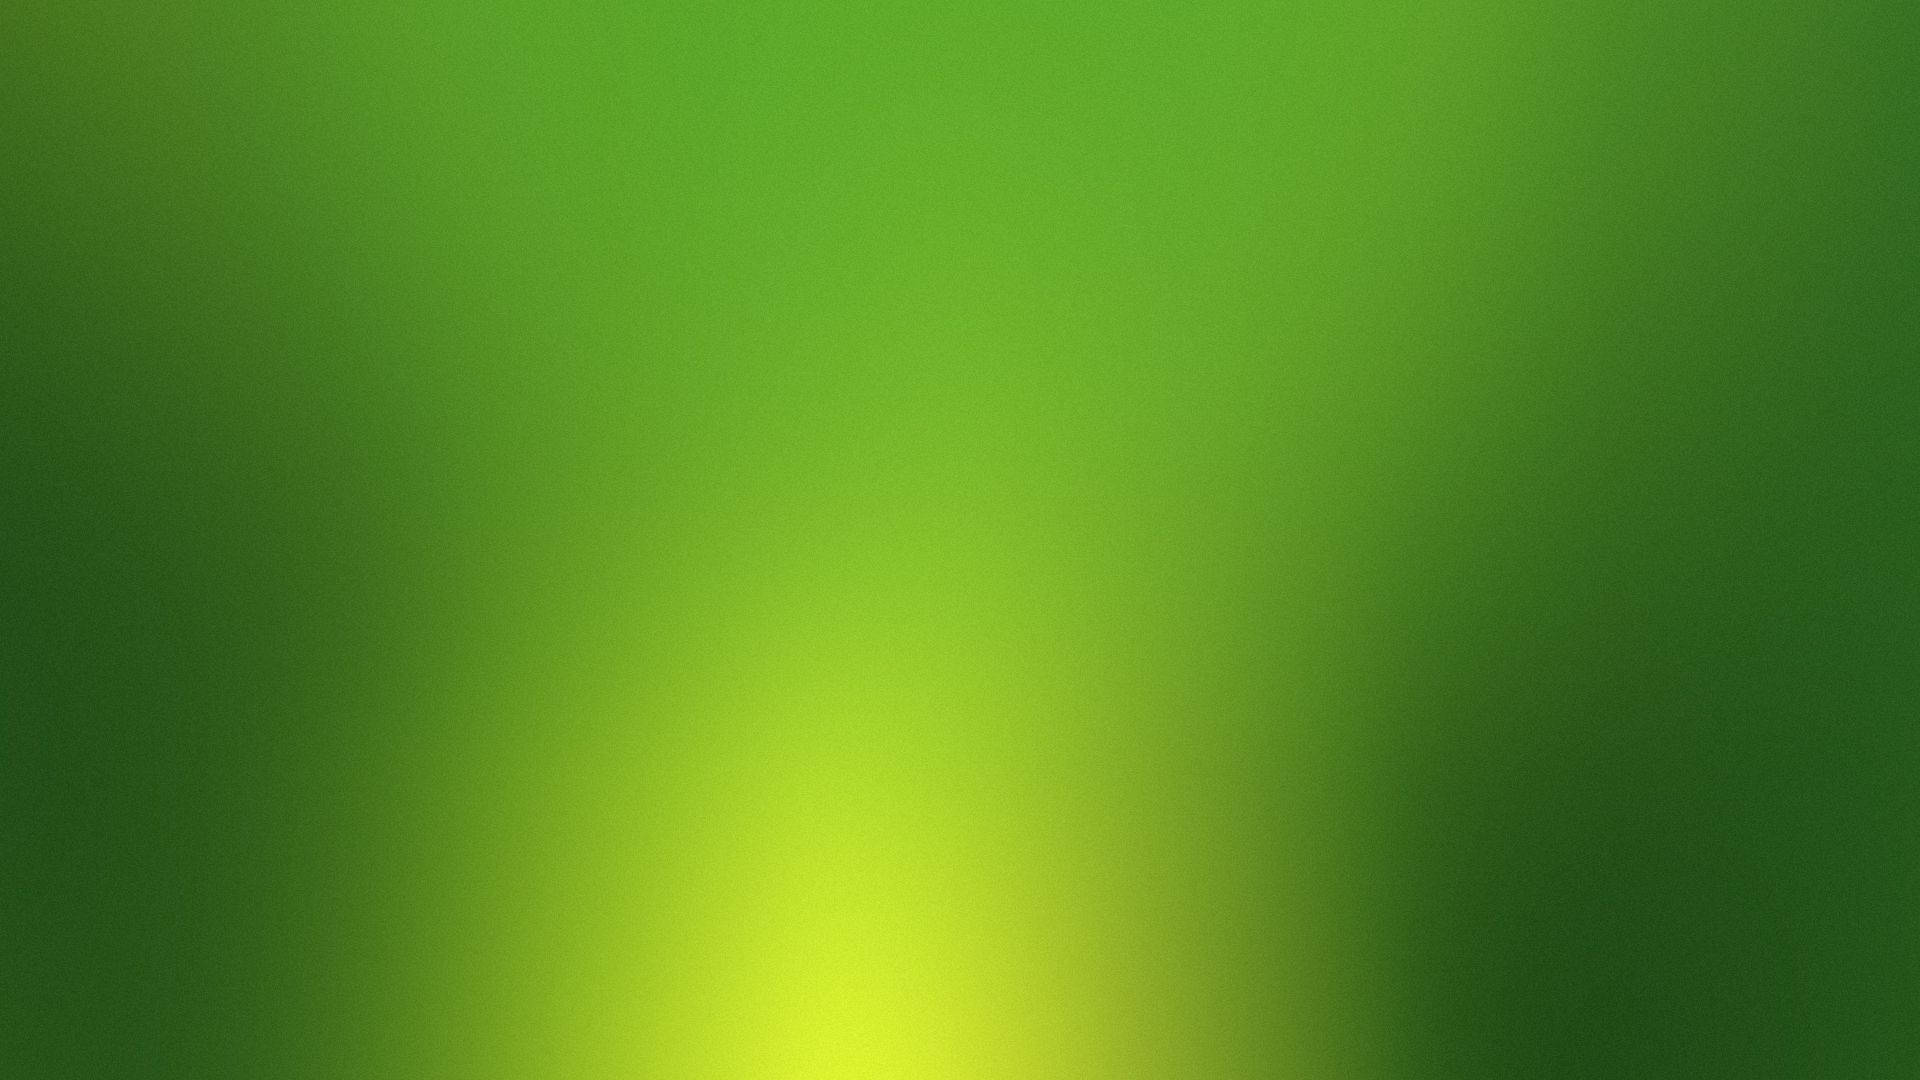 A refreshing and calming plain green background. Wallpaper